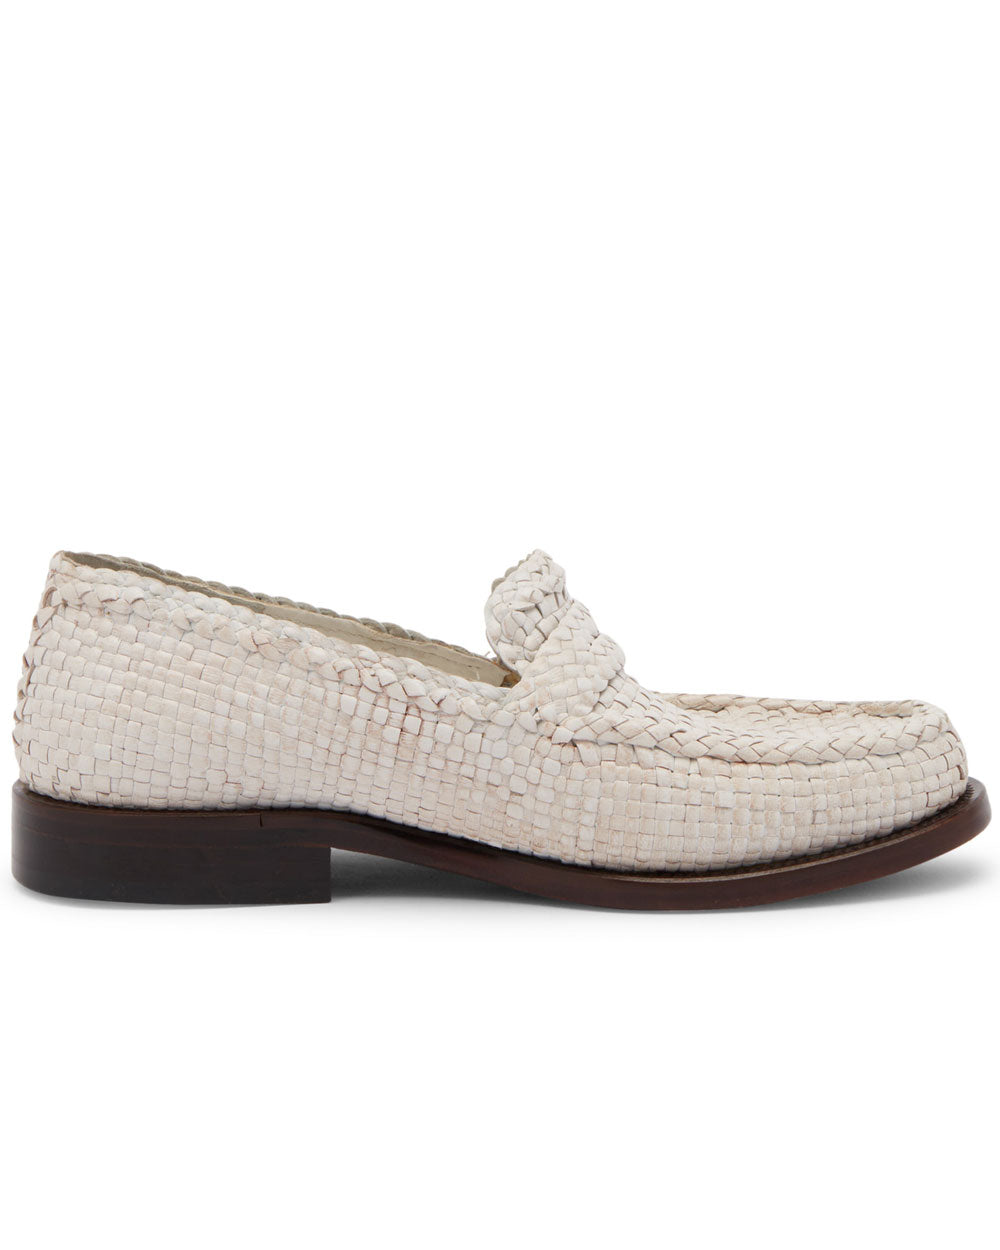 Woven Leather Loafer in White